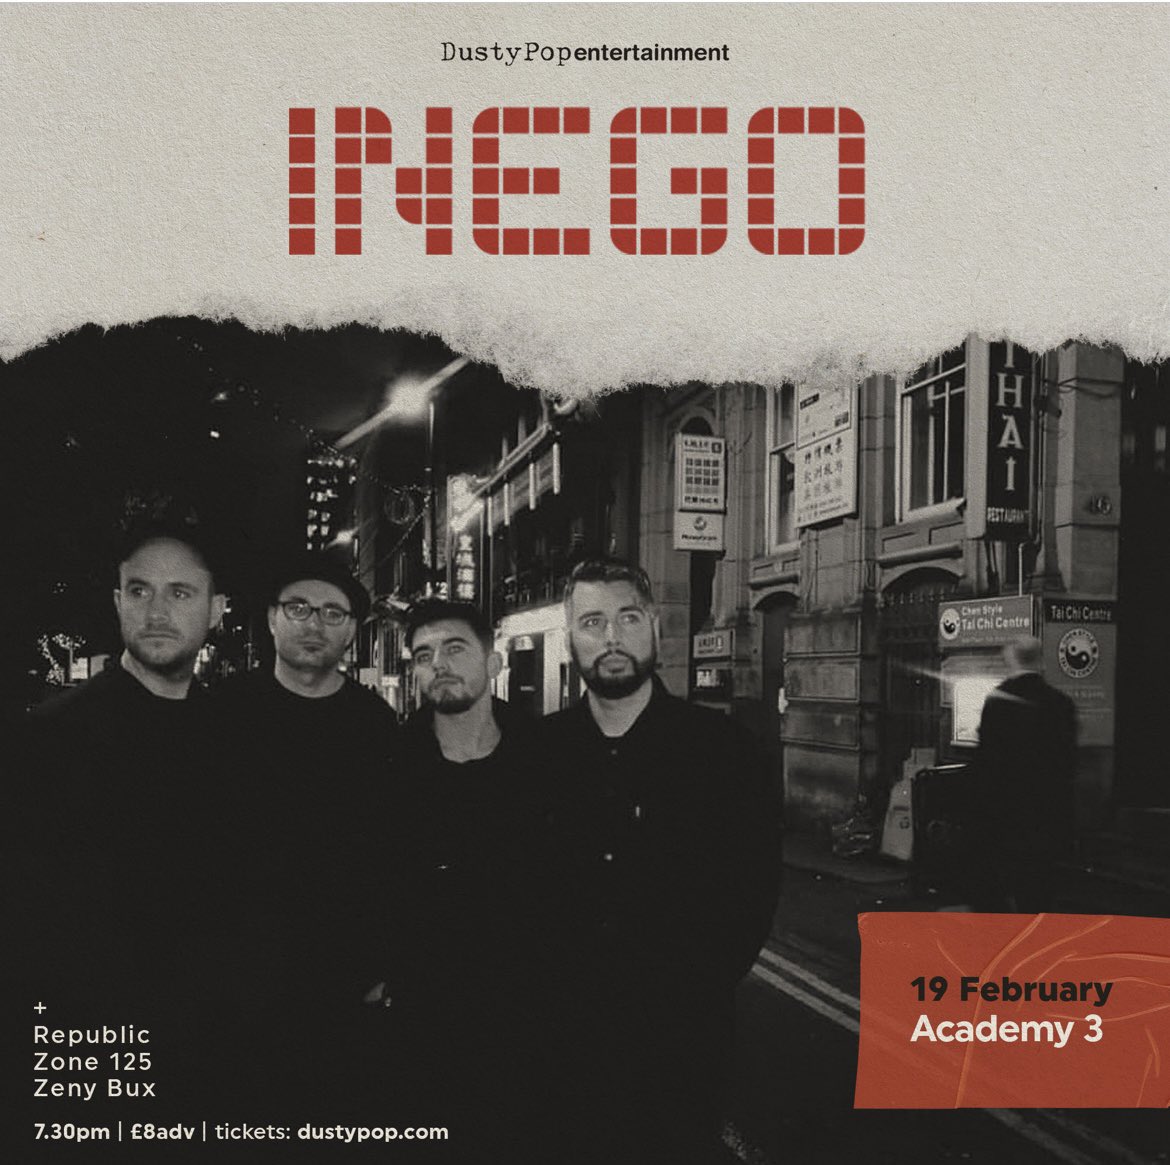 Get your last minute tickets for us supporting the brilliant @inegomusic alongside @republicmcr_ and @ZenyBux at Manchester Academy 3 this Saturday!!🔥 Ticket link: fatso.ma/VkIF 🖤